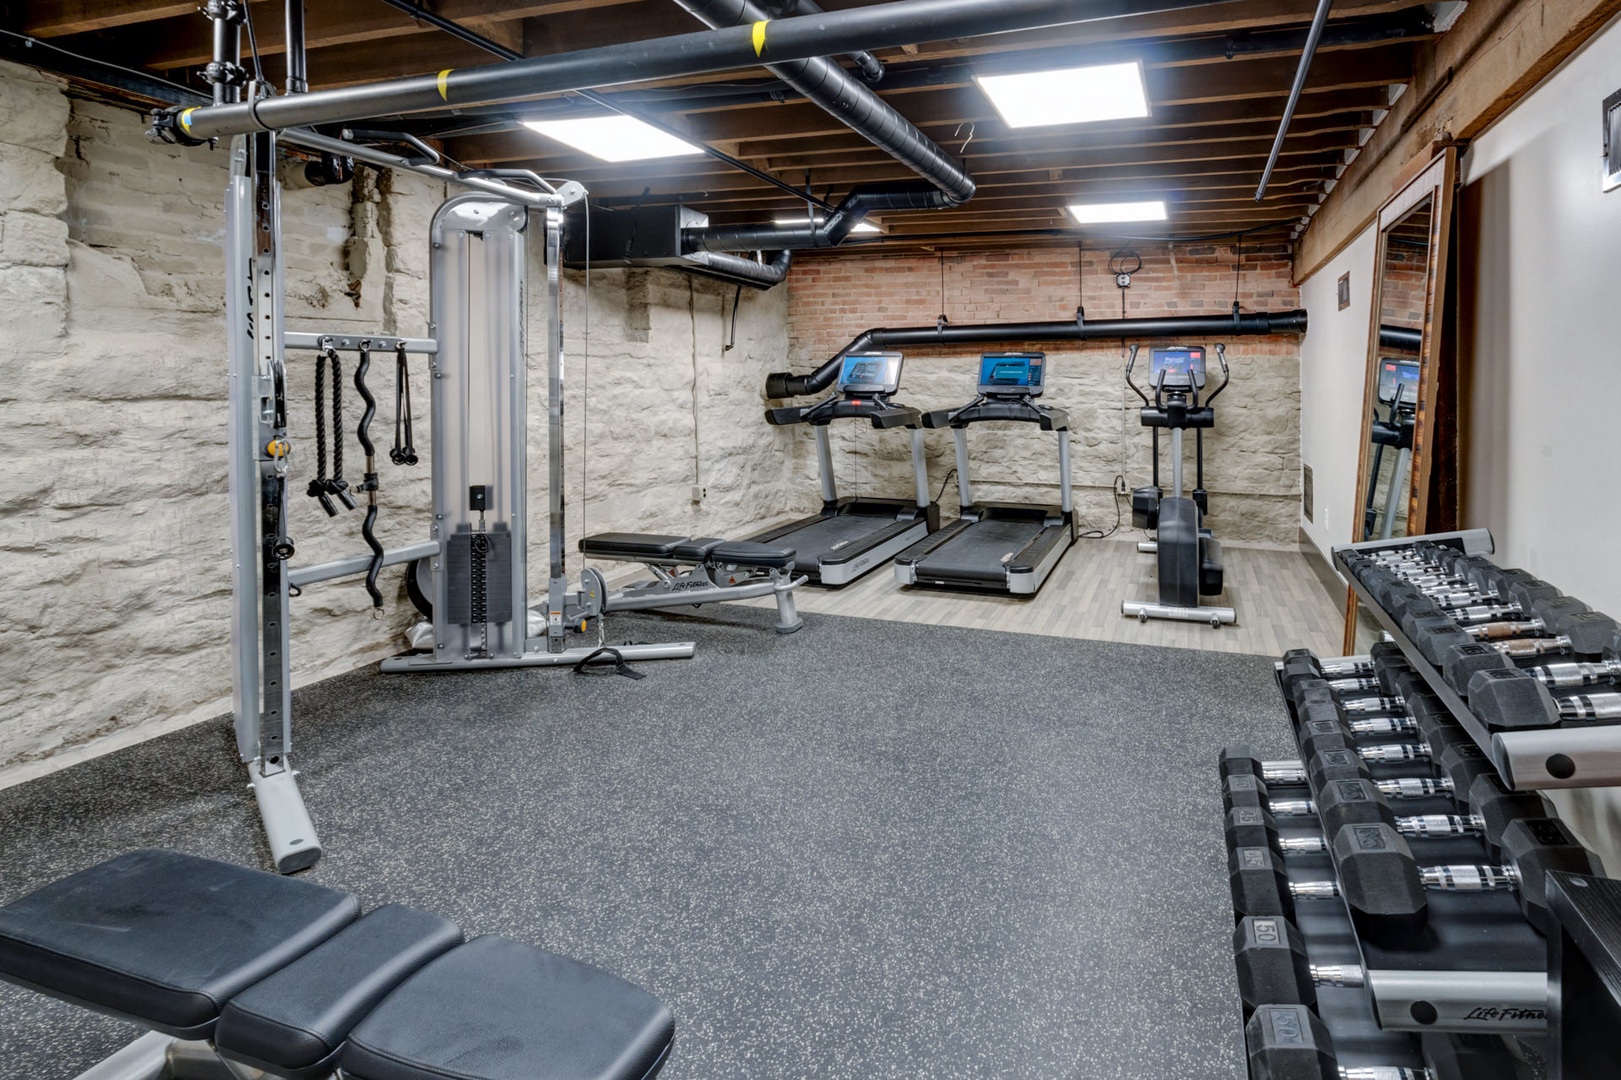 Apartment fitness room